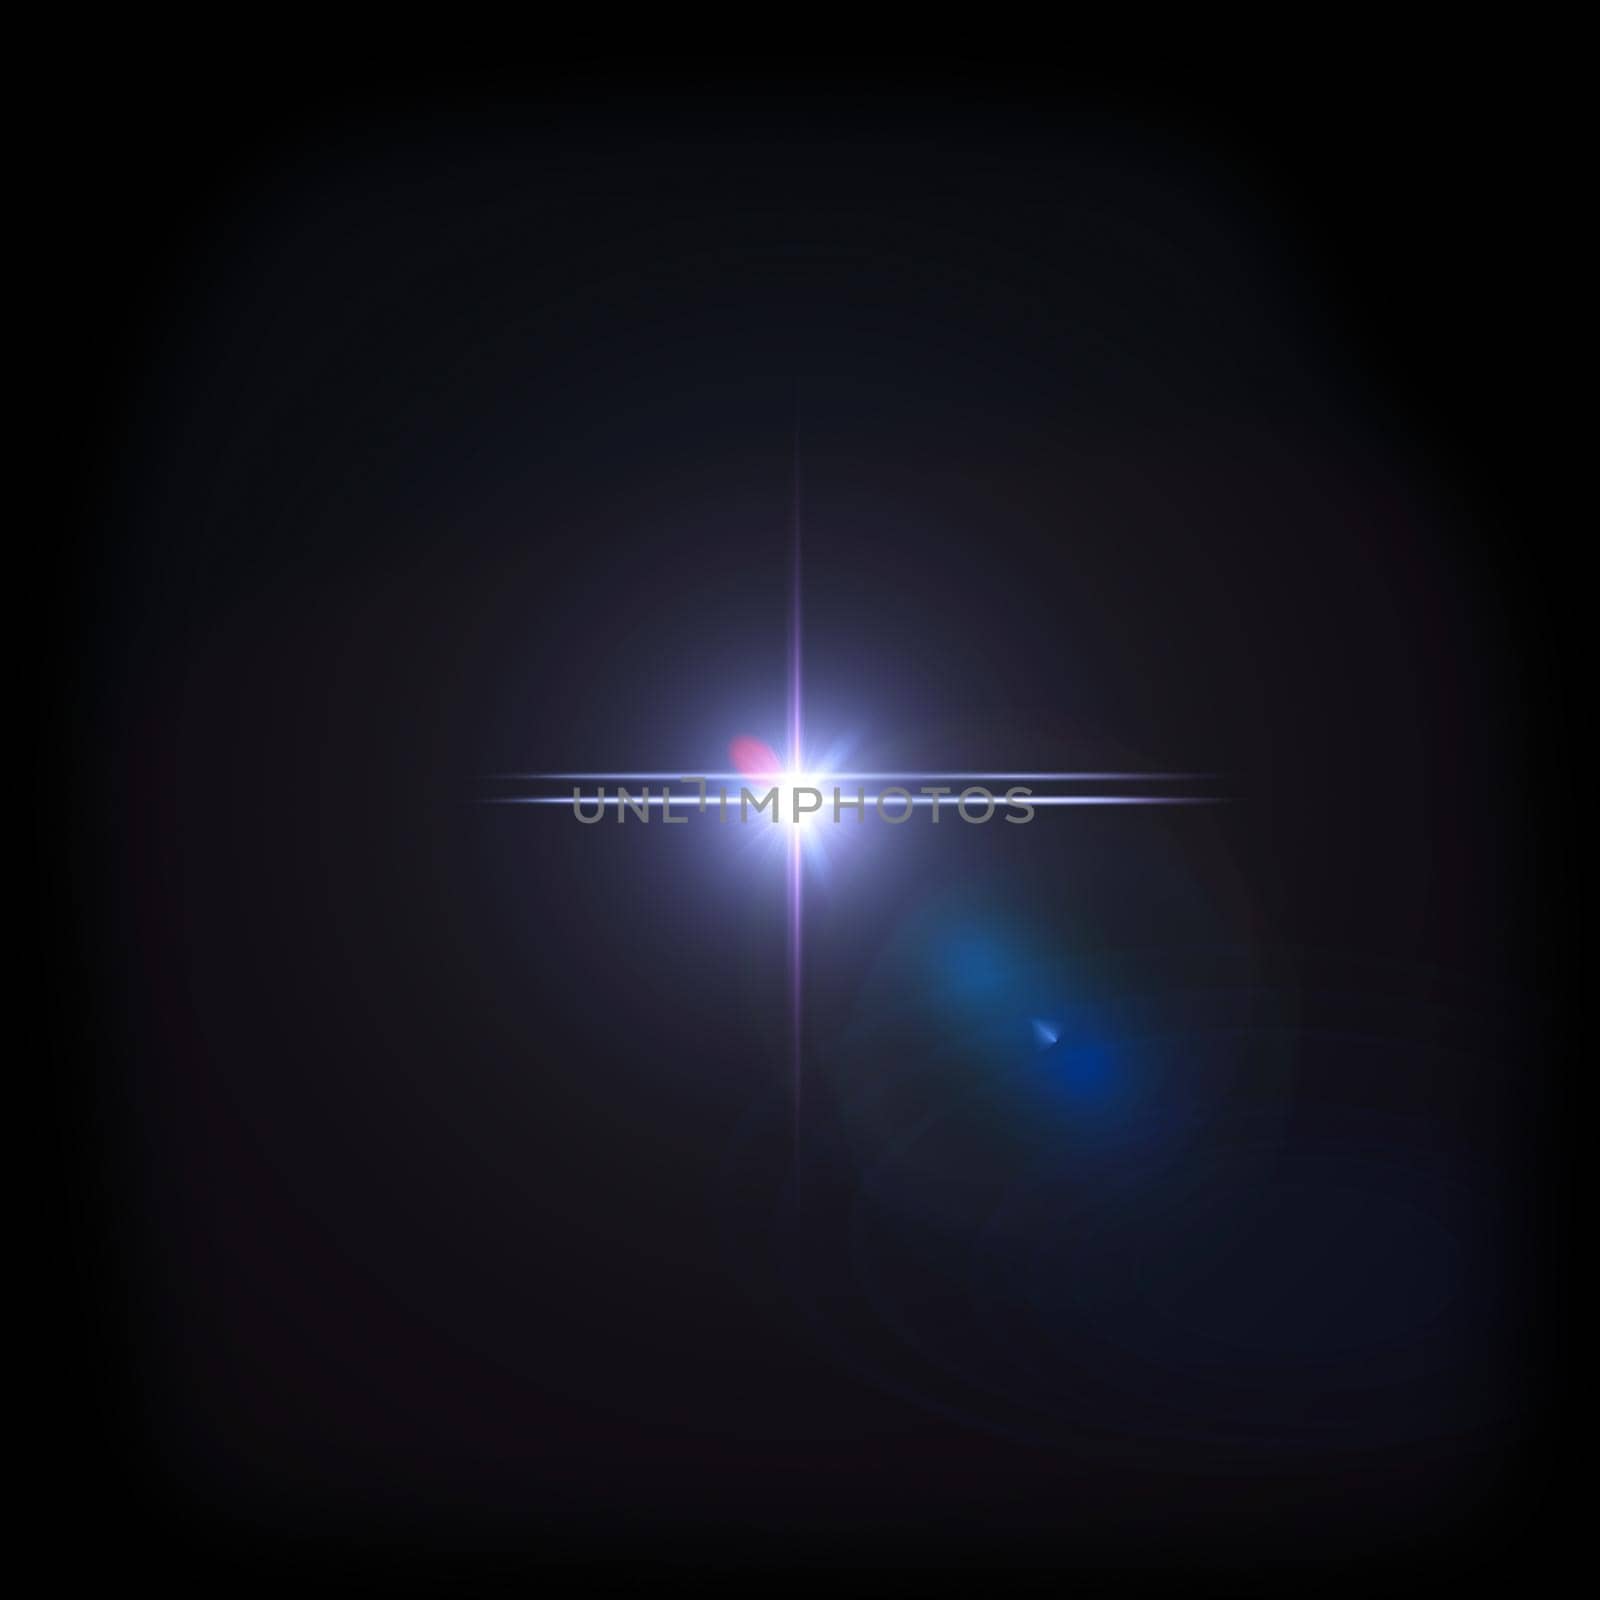 Purple Light Lens flare on black background. Lens flare with bright light isolated with a black background. Used for textures and materials.